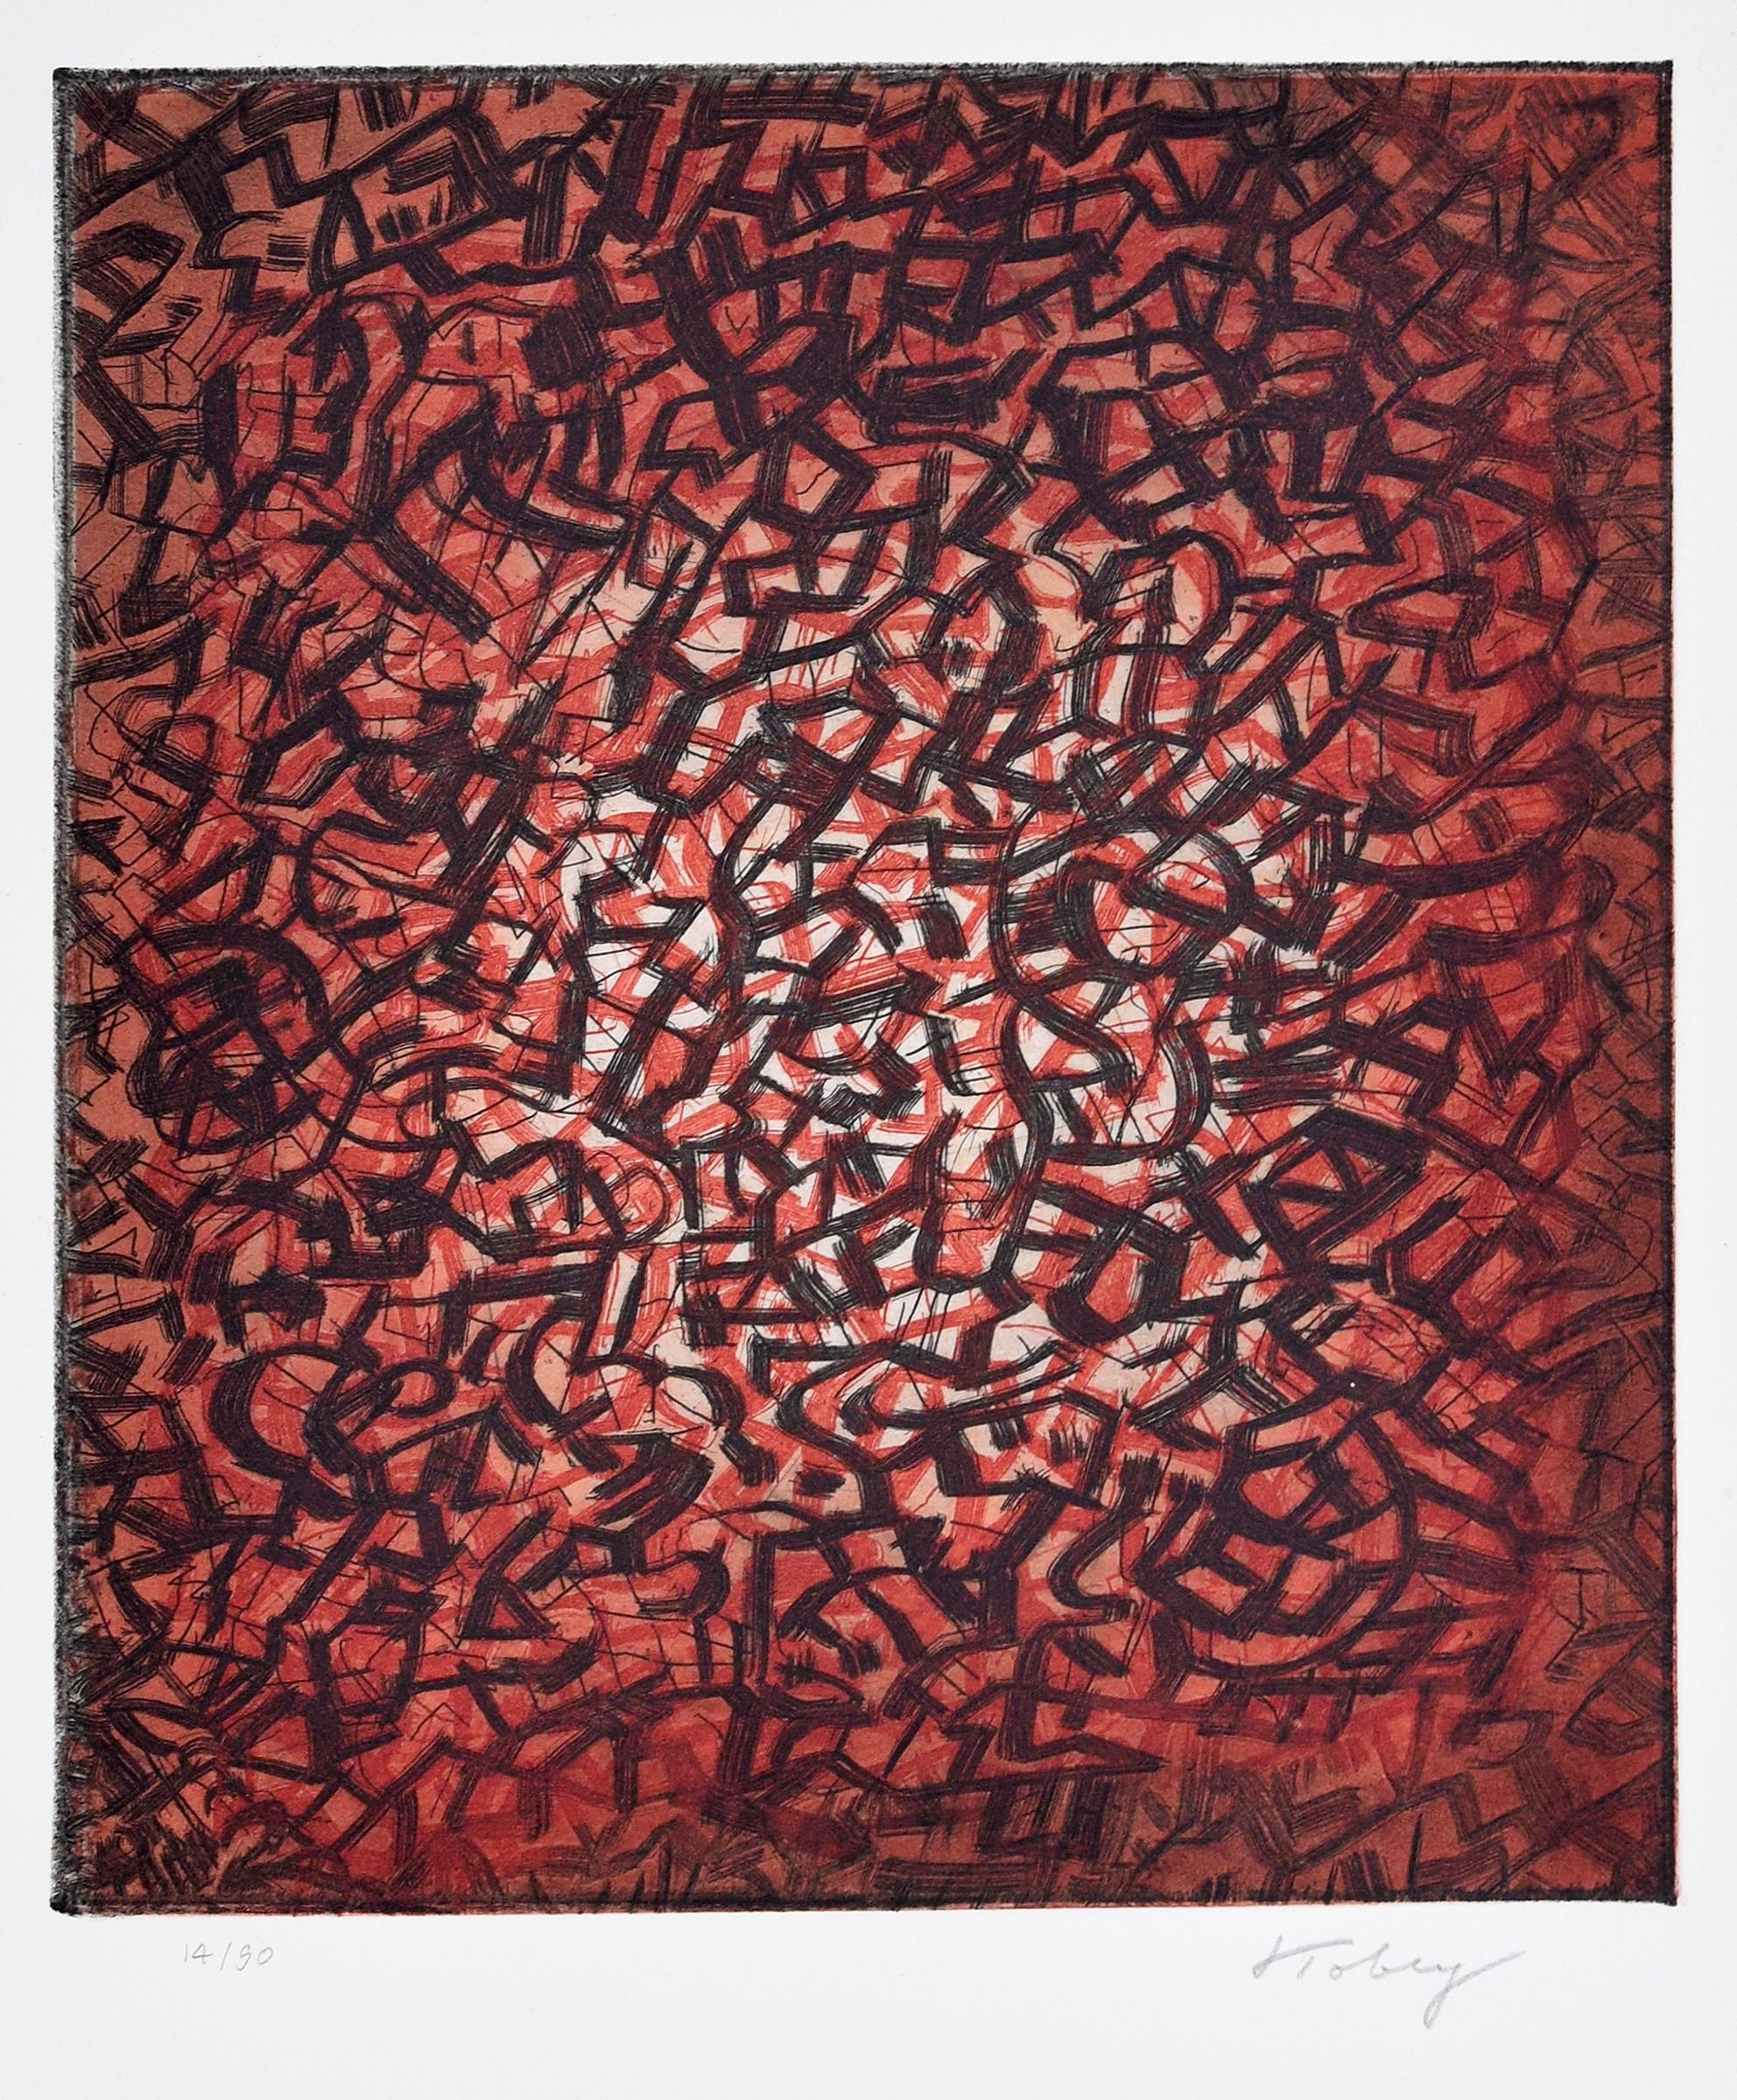 Awaking Earth is a beautiful color etching on cardboard realized in 1974 by the artist pioneer of the Abstract Expressionism, Mark Tobey.

This original print is signed and numbered in pencil on lower margin. Edition de Beauclair of 90 prints.